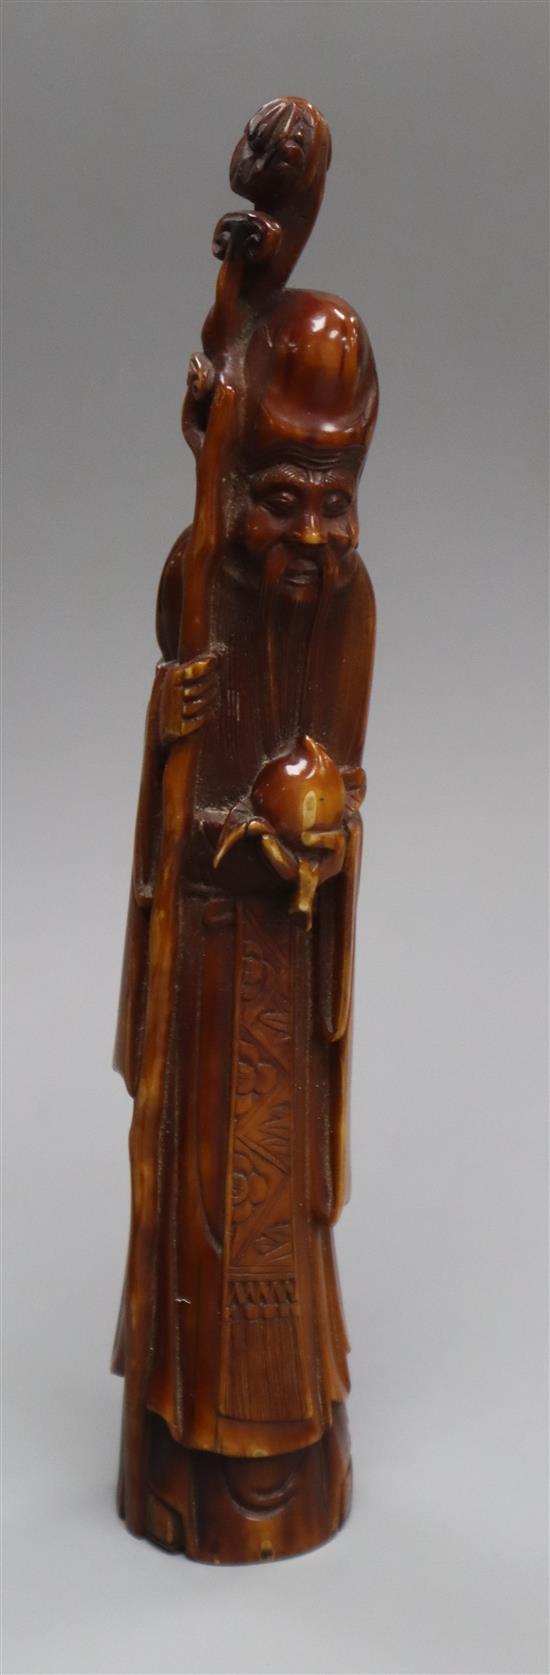 A 19th century Chinese stained marine ivory figure of Shou Lao